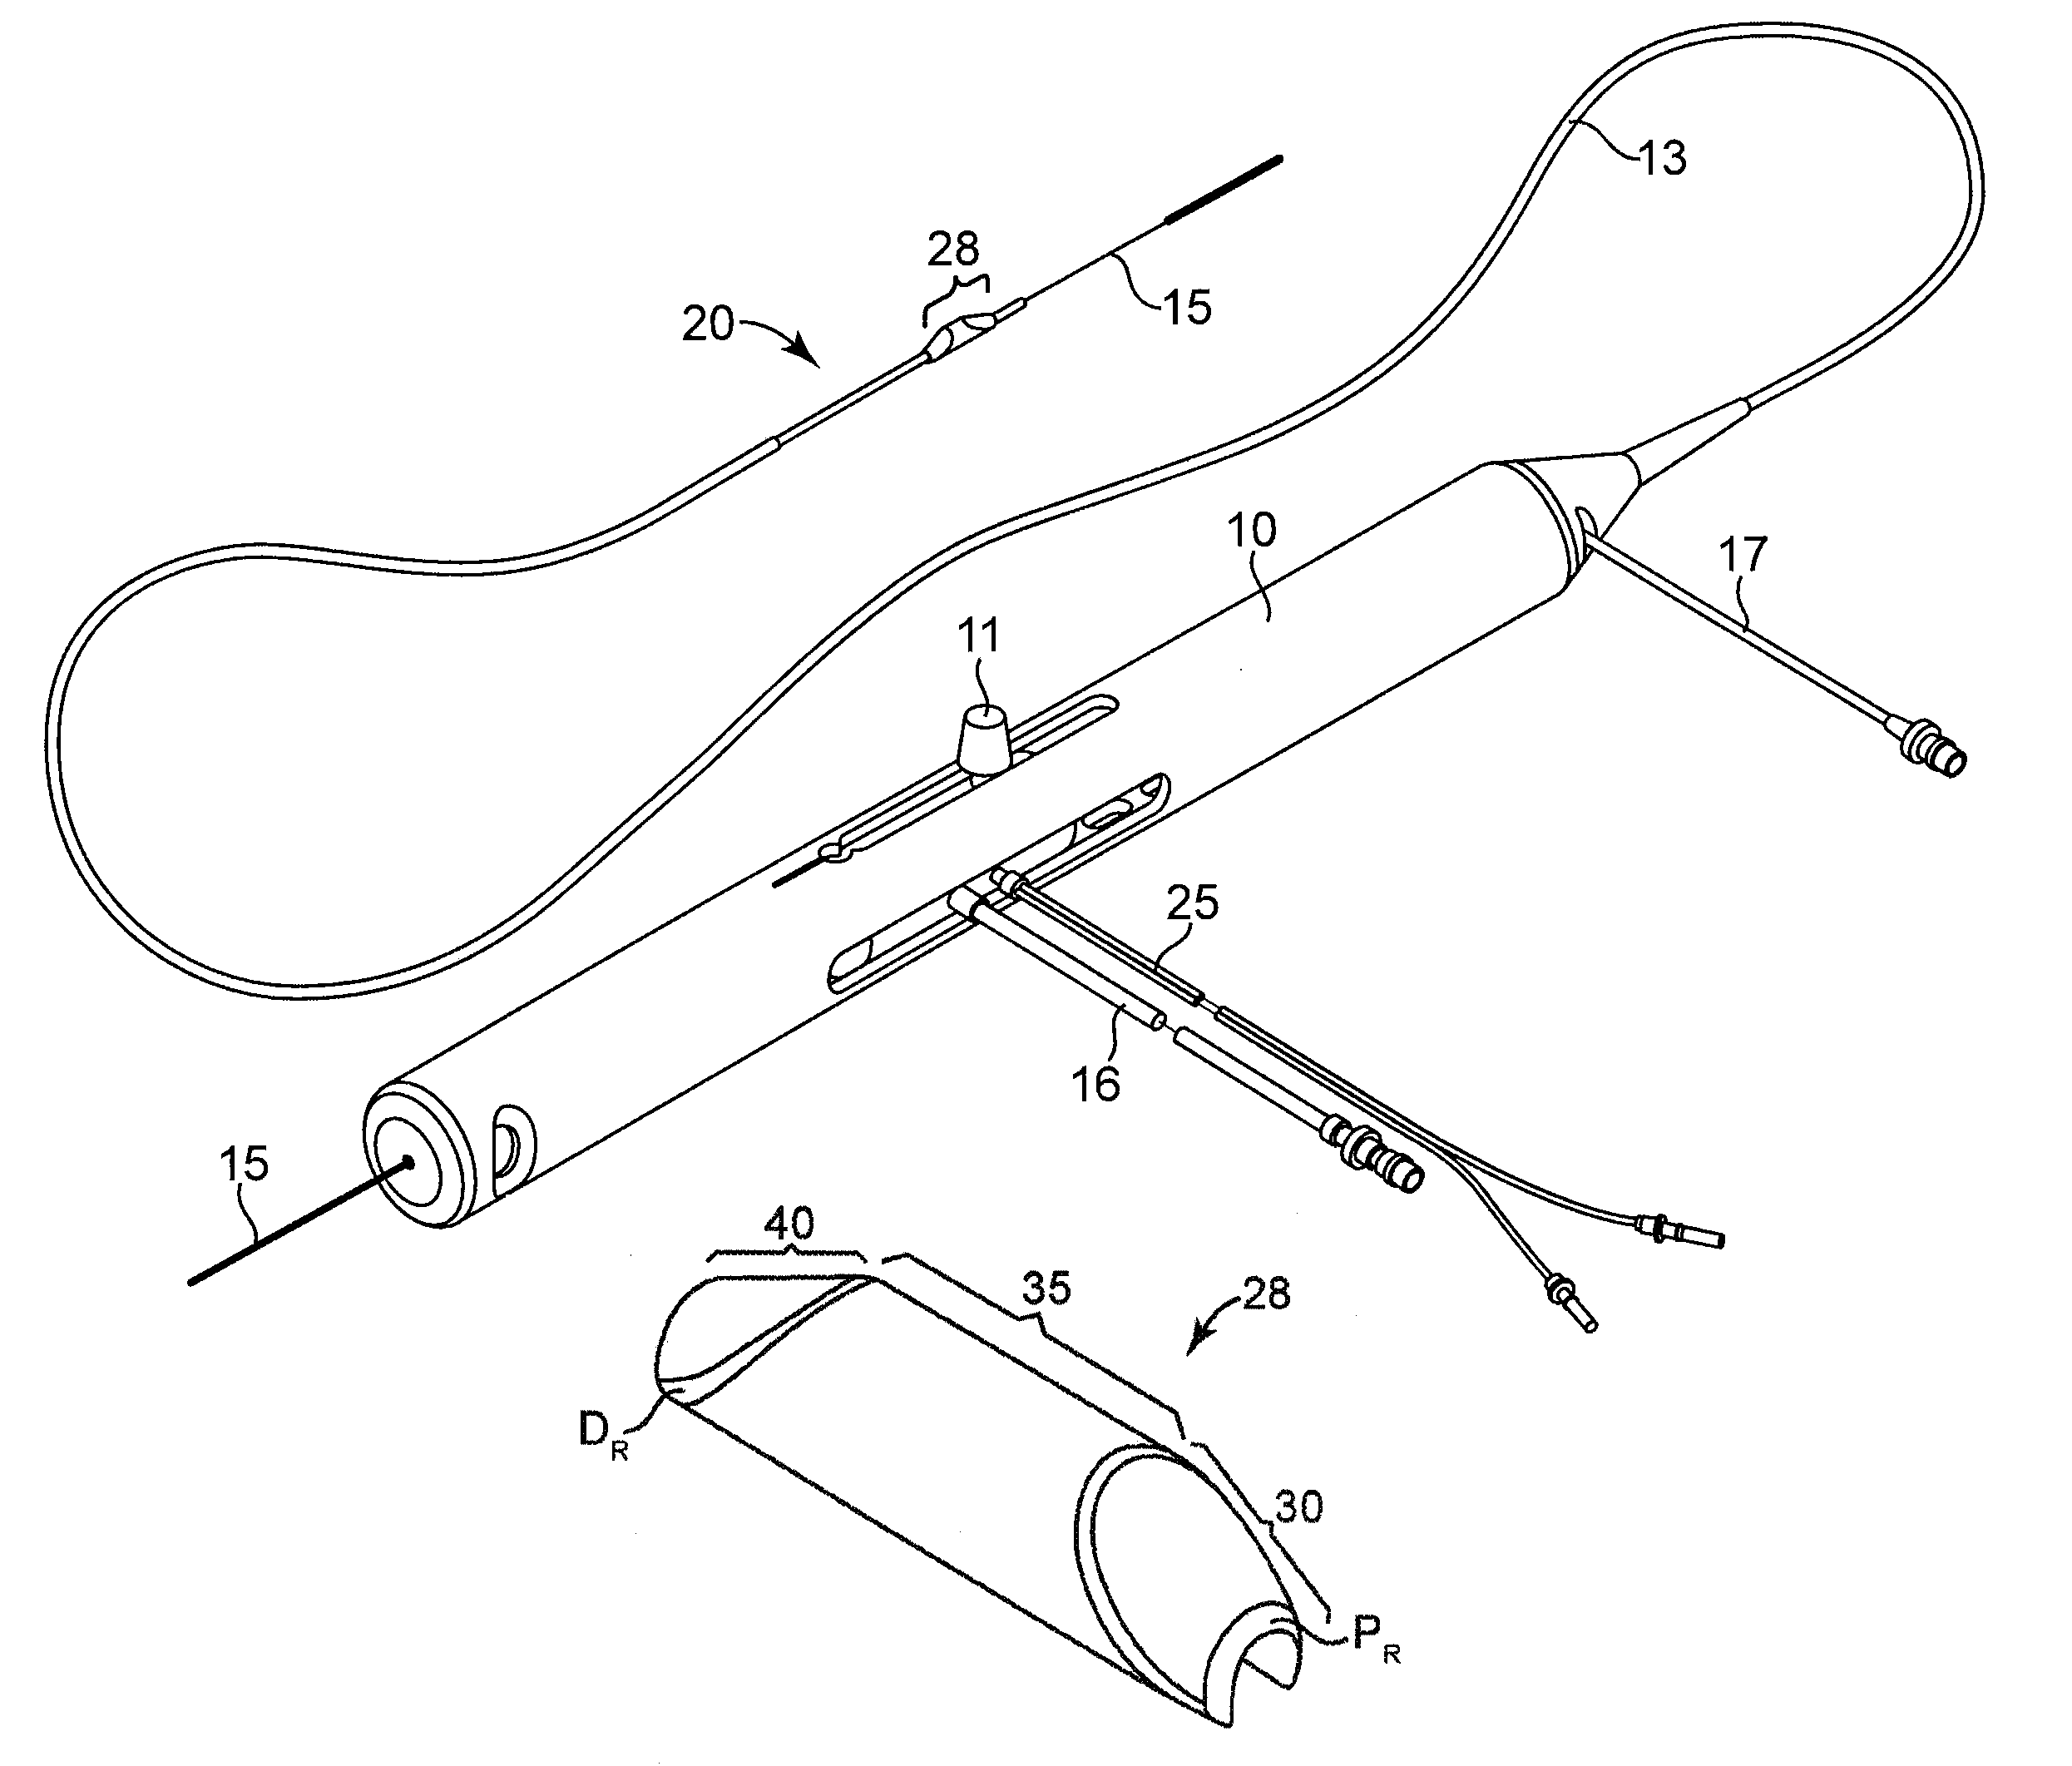 Eccentric abrading and cutting head for high-speed rotational atherectomy devices